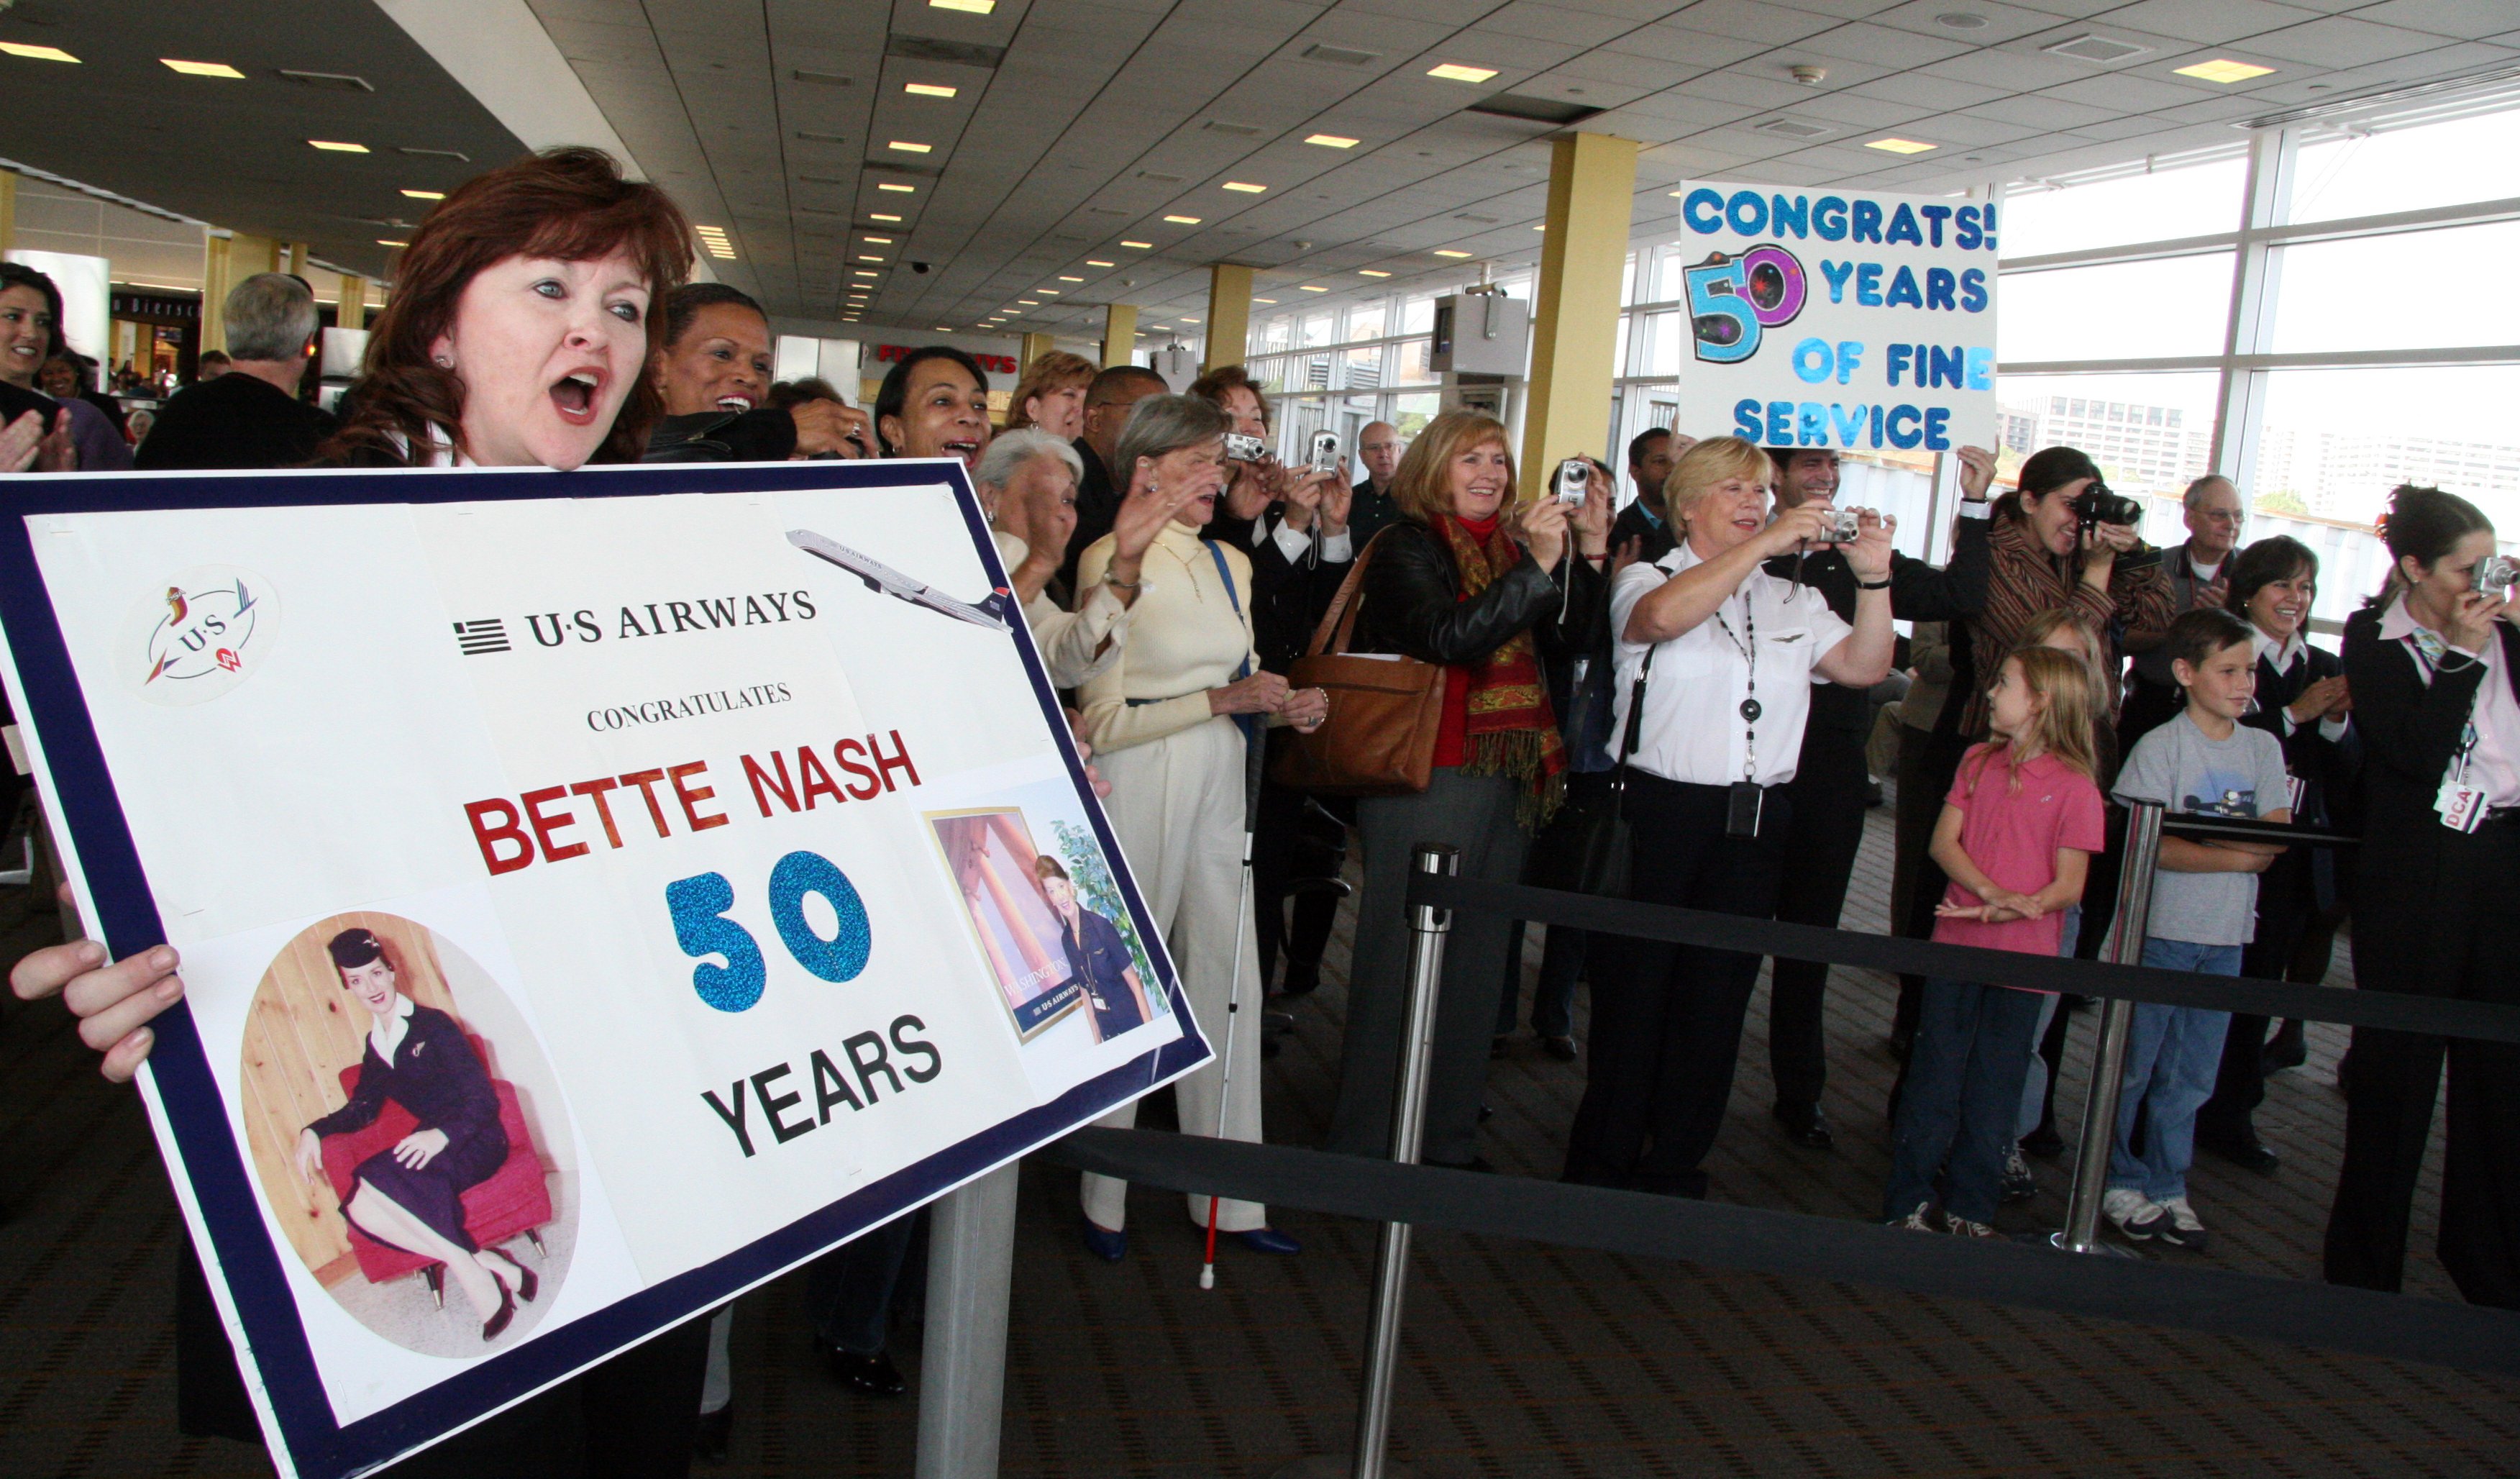 Friends and family celebrating Bette Nash's 50 years of service in Arlington, Virginia on November 1, 2007. | Source: Getty Images